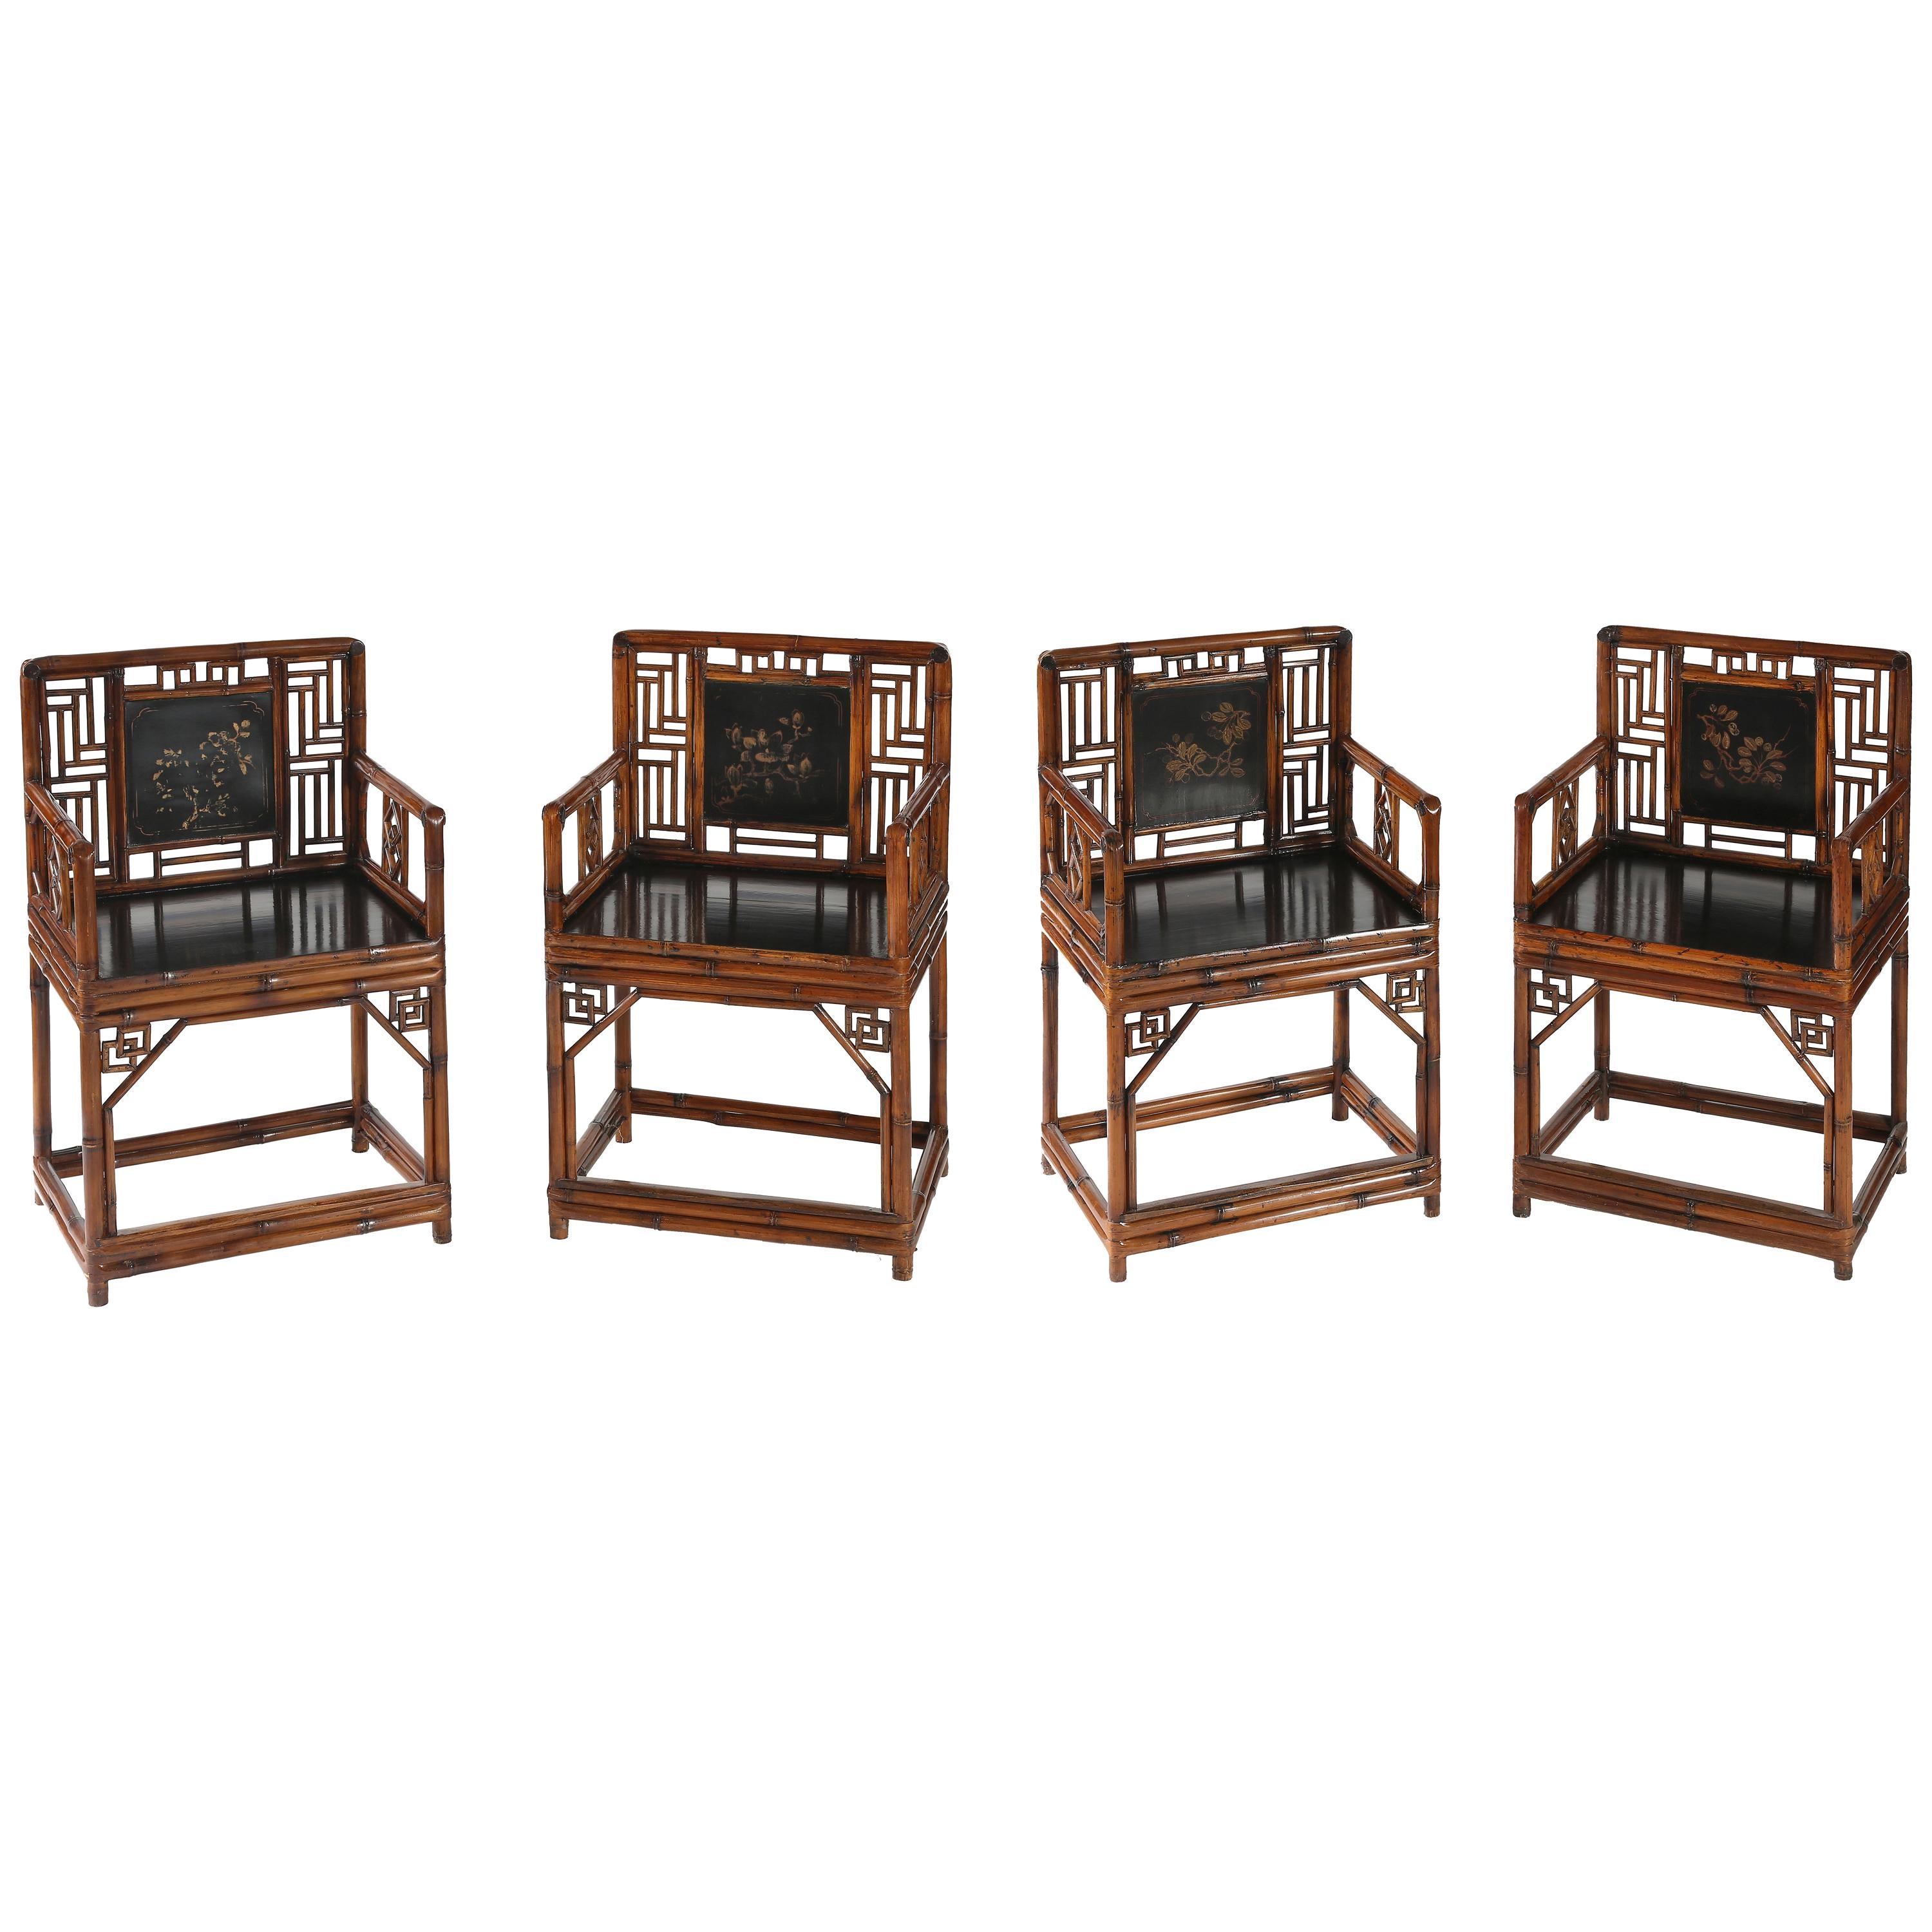 Set of 4 Bamboo Armchairs with Gilt Floral Painting on Black Lacquer Back